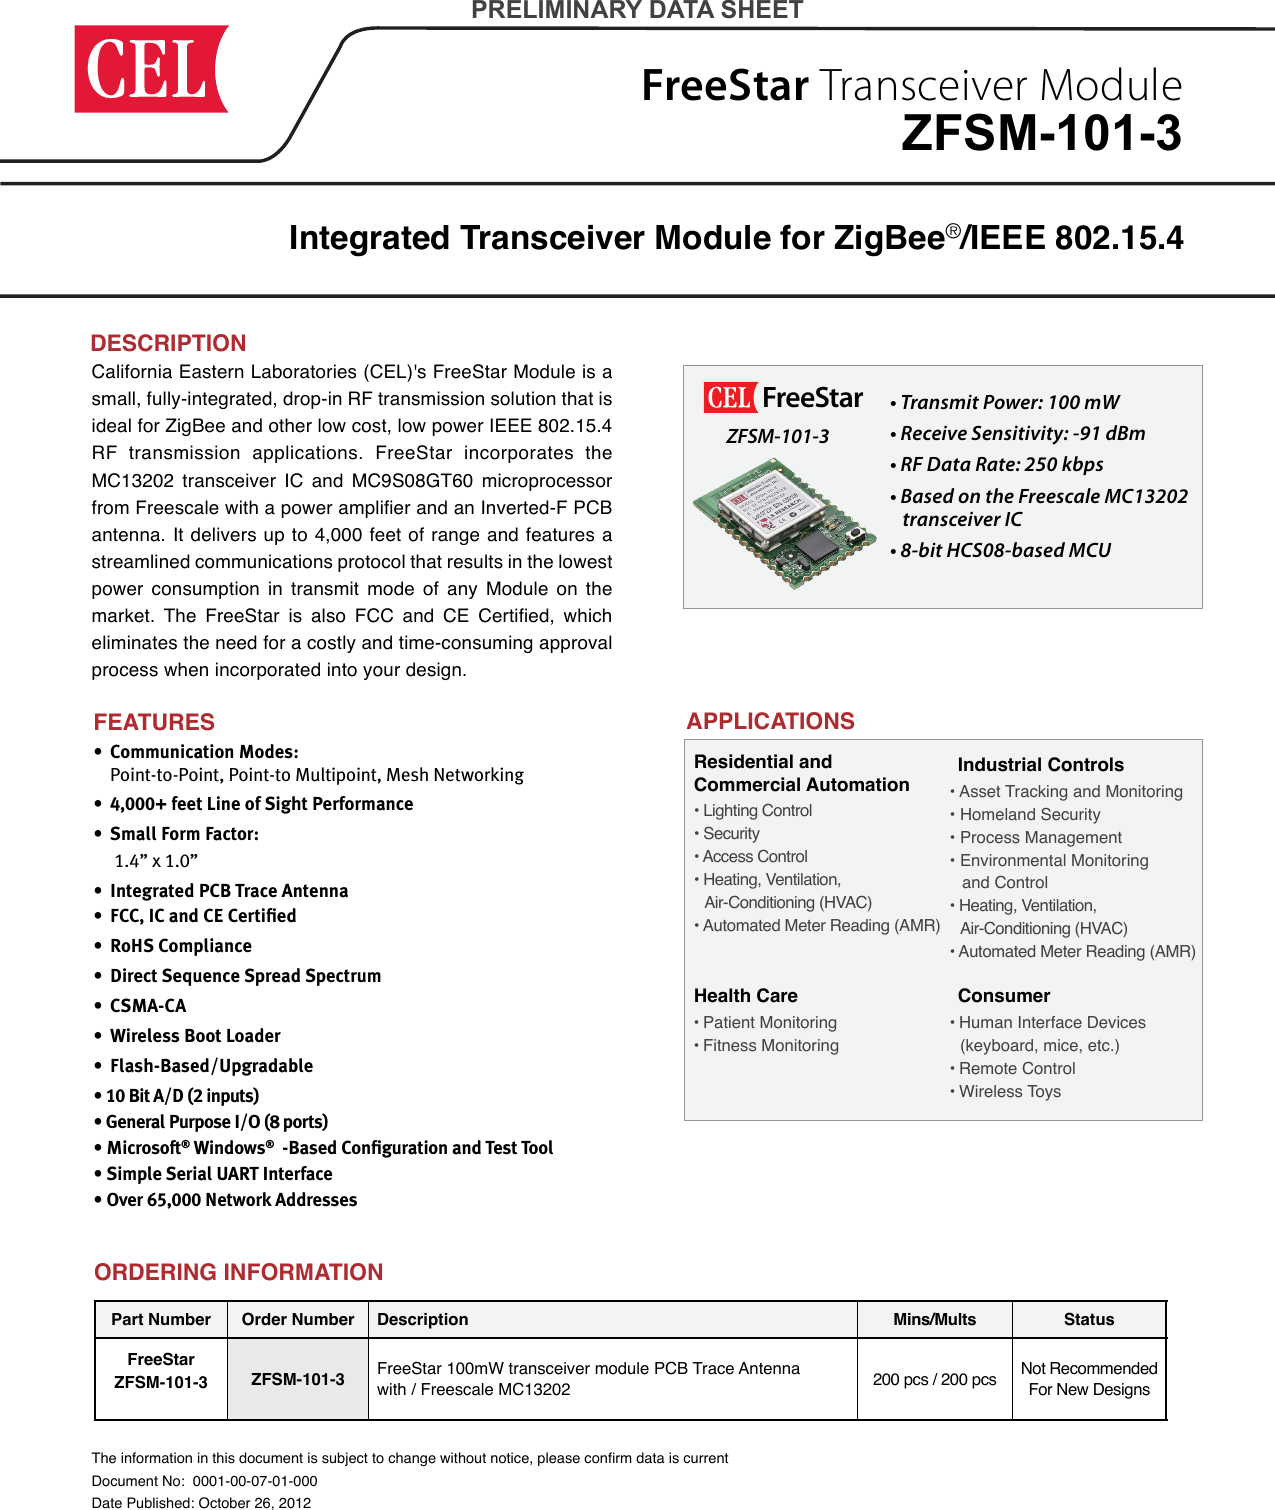 FreeStar Transceiver ModuleCalifornia Eastern Laboratories (CEL)&apos;s FreeStar Module is a small, fully-integrated, drop-in RF transmission solution that is ideal for ZigBee and other low cost, low power IEEE 802.15.4 RF transmission applications. FreeStar incorporates the MC13202 transceiver IC and MC9S08GT60 microprocessor from Freescale with a power amplier and an Inverted-F PCB antenna. It delivers up to 4,000 feet of range and features a streamlined communications protocol that results in the lowest power consumption in transmit mode of any Module on the market.  The  FreeStar  is  also  FCC  and  CE  Certied,  which eliminates the need for a costly and time-consuming approval process when incorporated into your design.Integrated Transceiver Module for ZigBee®/IEEE 802.15.4 The information in this document is subject to change without notice, please conrm data is currentDocument No:  0001-00-07-01-000Date Published: October 26, 2012PRELIMINARY DATA SHEETDESCRIPTIONZFSM-101-3 •  Communication Modes:  Point-to-Point, Point-to Multipoint, Mesh Networking  •  4,000+ feet Line of Sight Performance     •  Small Form Factor:    1.4” x 1.0” •  Integrated PCB Trace Antenna  •  FCC, IC and CE Certiﬁed •  RoHS Compliance      •  Direct Sequence Spread Spectrum •  CSMA-CA •  Wireless Boot Loader •  Flash-Based/Upgradable• 10 Bit A/D (2 inputs)• General Purpose I/O (8 ports)• Microsoft® Windows®  -Based Conﬁguration and Test Tool• Simple Serial UART Interface• Over 65,000 Network AddressesFEATURESFreeStar ZFSM-101-3• Transmit Power: 100 mW • Receive Sensitivity: -91 dBm • RF Data Rate: 250 kbps• Based on the Freescale MC13202    transceiver IC • 8-bit HCS08-based MCU  APPLICATIONSHealth Care• Patient Monitoring• Fitness MonitoringIndustrial Controls• Asset Tracking and Monitoring• Homeland Security• Process Management• Environmental Monitoring    and Control• Heating, Ventilation,    Air-Conditioning (HVAC)• Automated Meter Reading (AMR)Consumer• Human Interface Devices    (keyboard, mice, etc.)• Remote Control• Wireless ToysResidential and  Commercial Automation • Lighting Control• Security• Access Control• Heating, Ventilation,    Air-Conditioning (HVAC)• Automated Meter Reading (AMR)Part Number Order Number Description Mins/Mults StatusFreeStarZFSM-101-3 ZFSM-101-3 FreeStar 100mW transceiver module PCB Trace Antenna  with / Freescale MC13202 200 pcs / 200 pcs Not Recommended For New DesignsORDERING INFORMATION